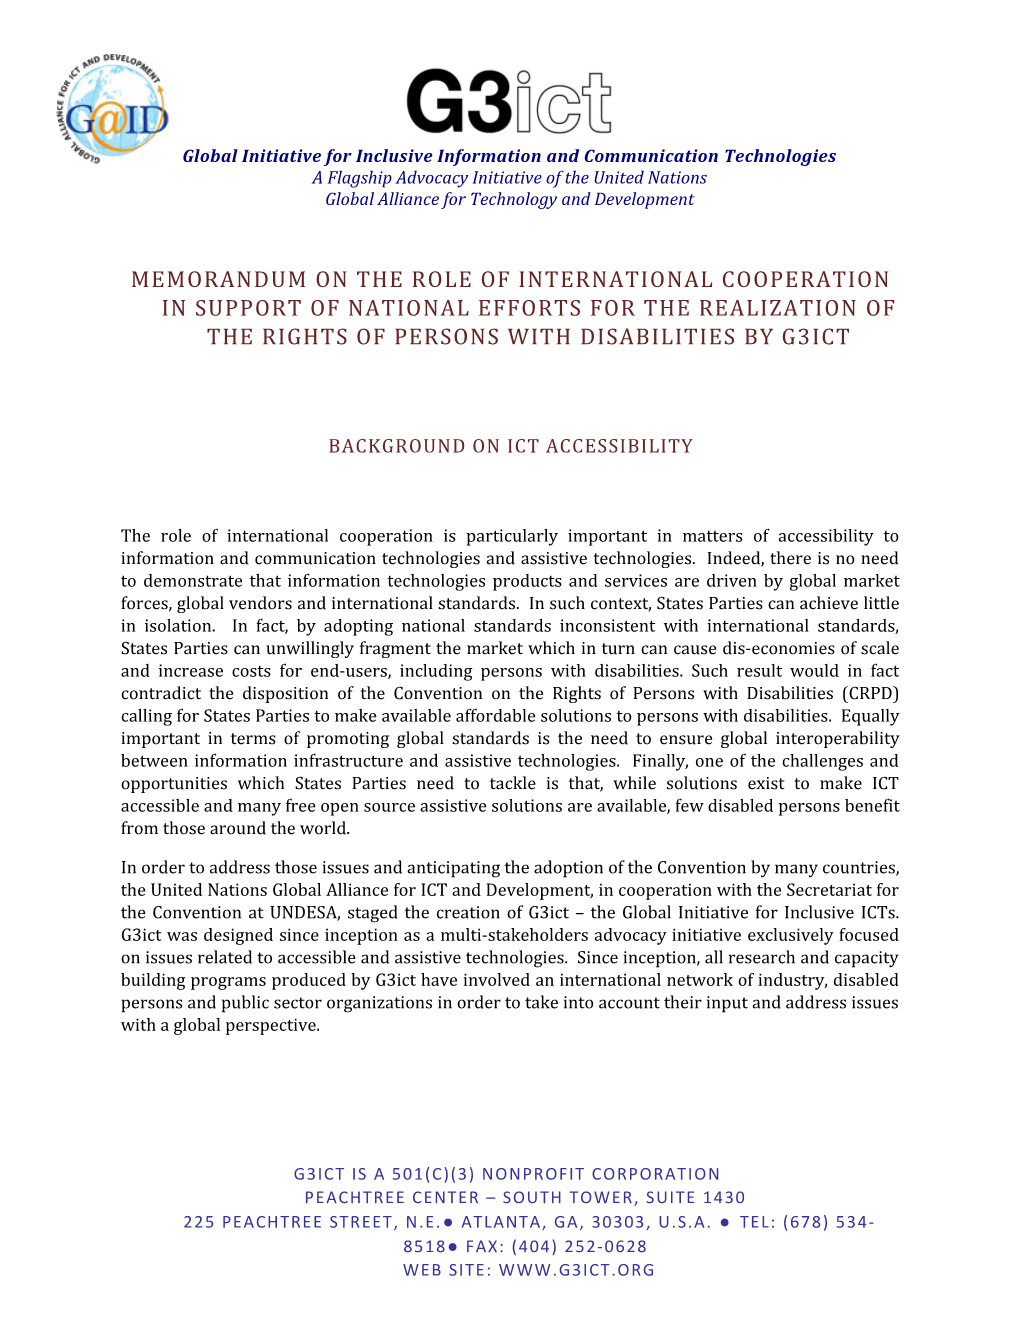 Memorandum on the Role of International Cooperation in Support of National Efforts For